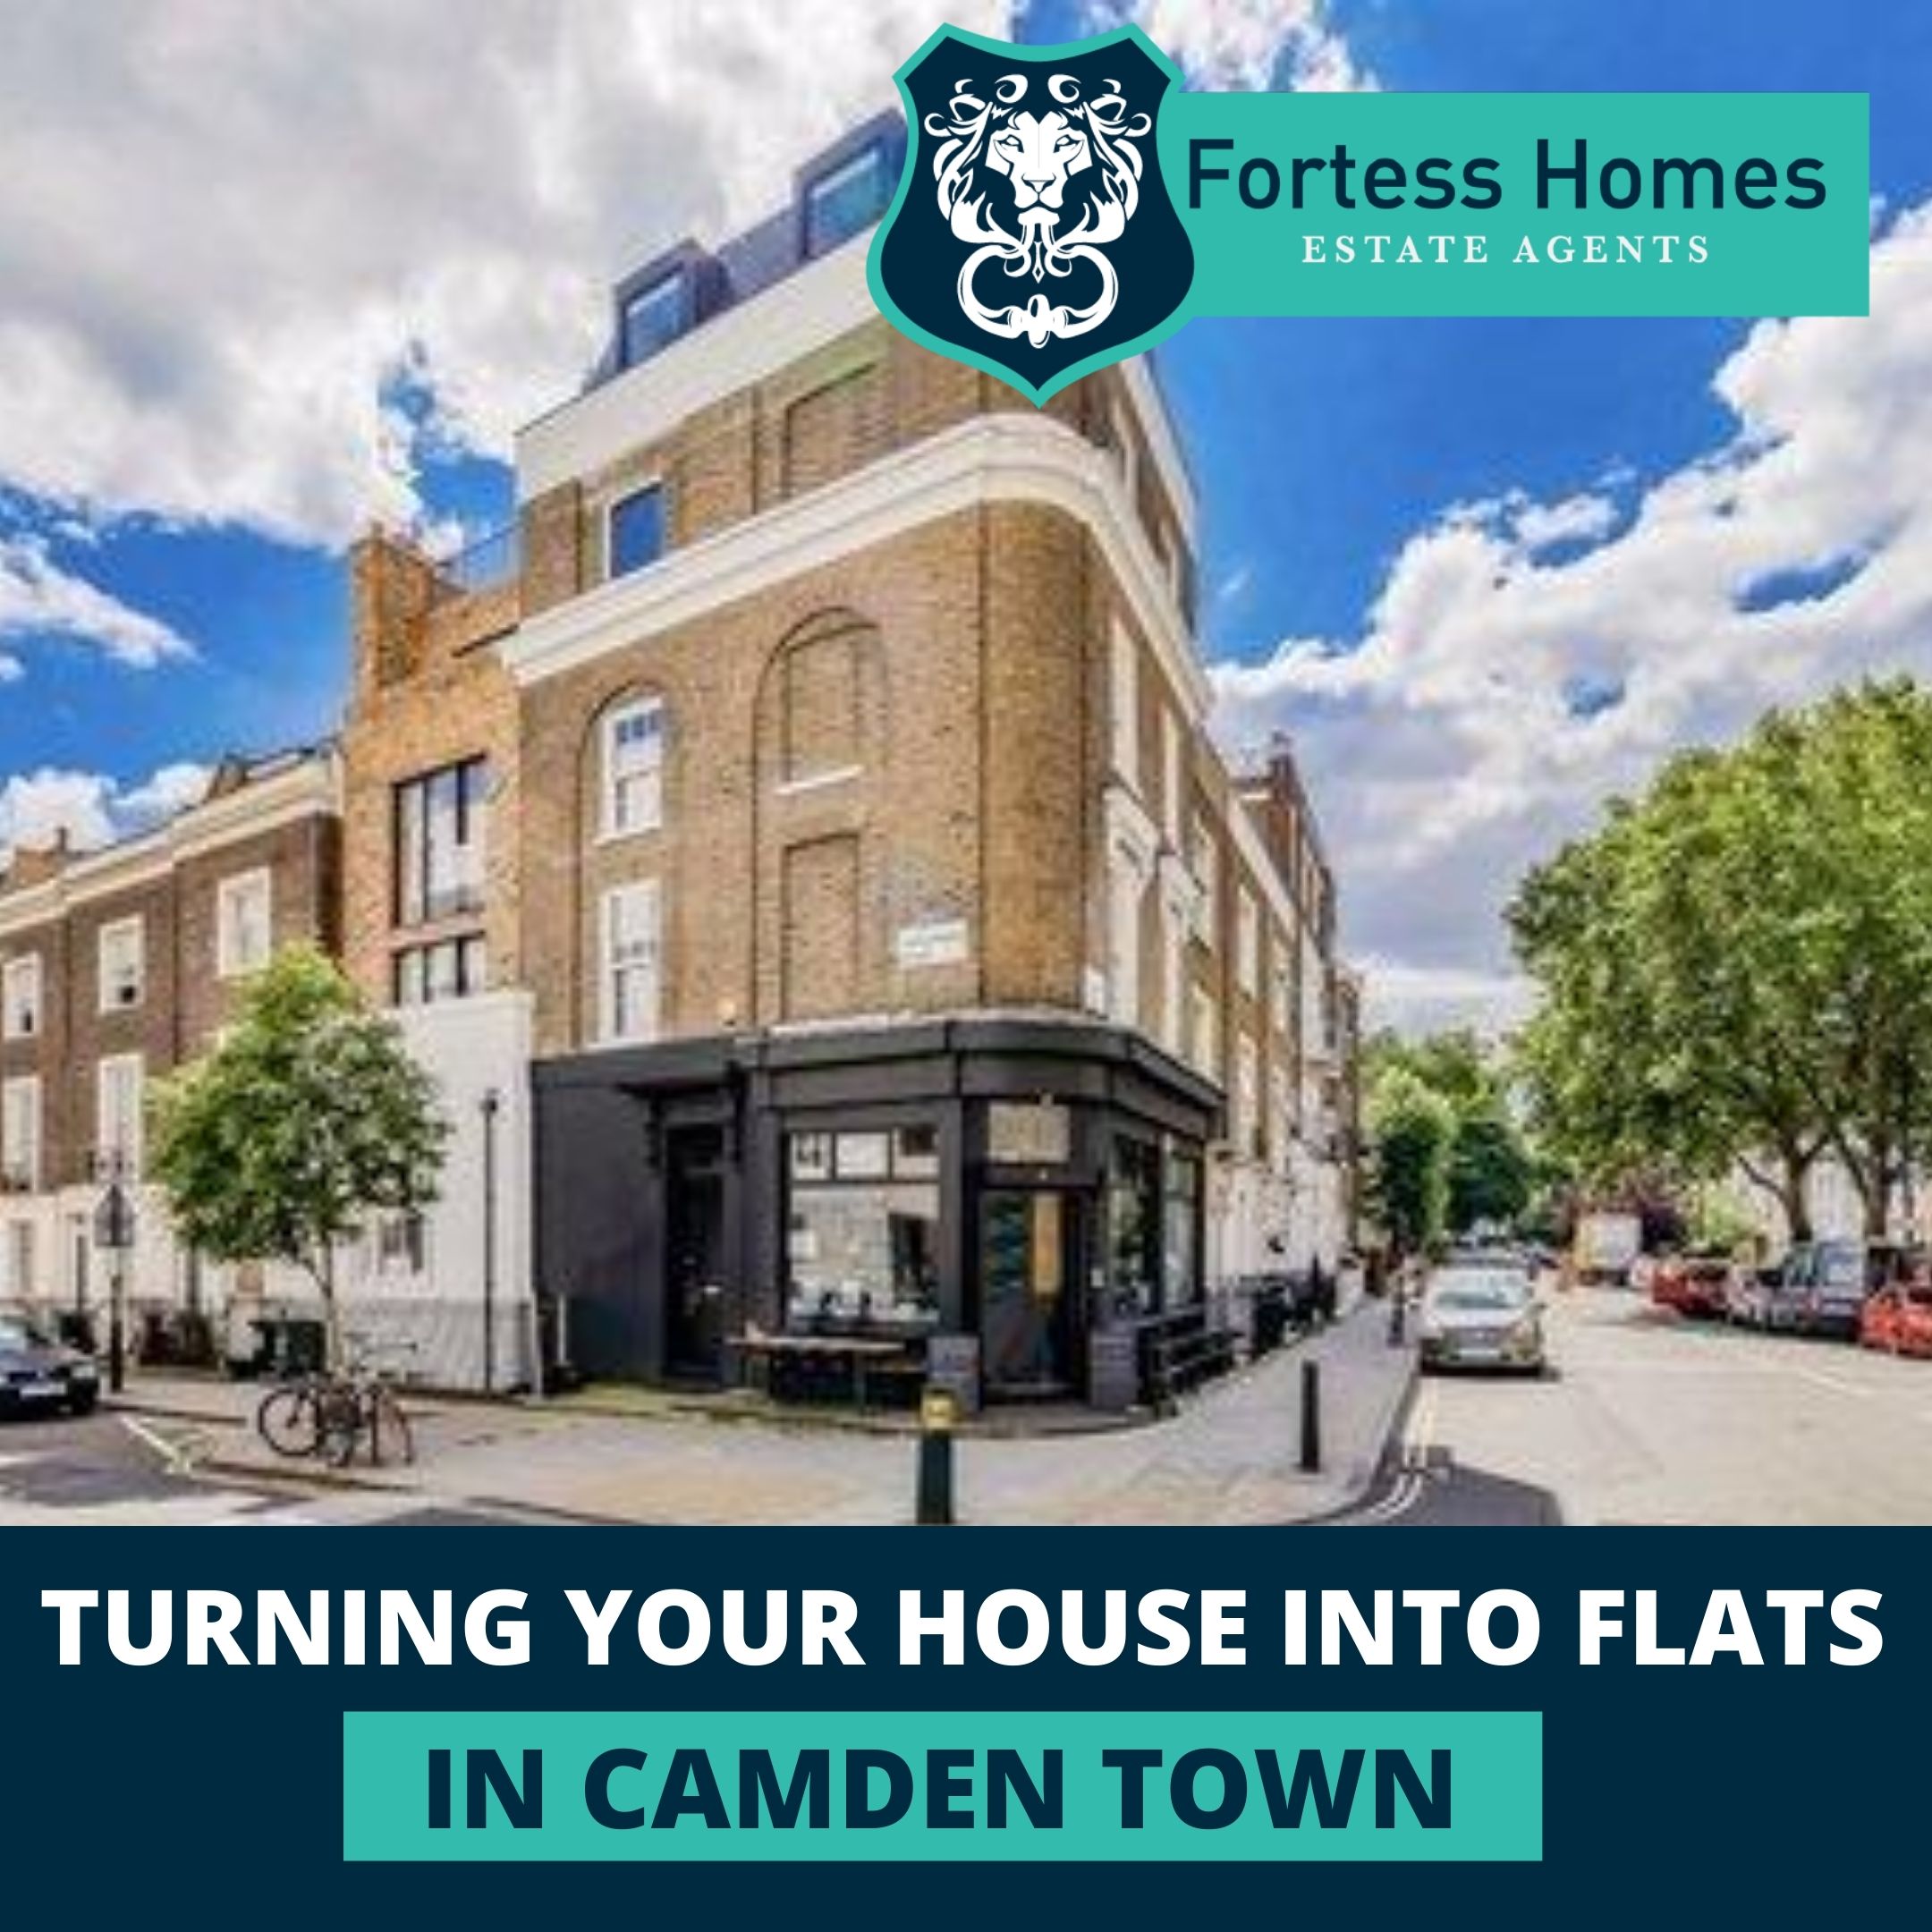 TURNING YOUR HOUSE INTO FLATS IN CAMDEN TOWN